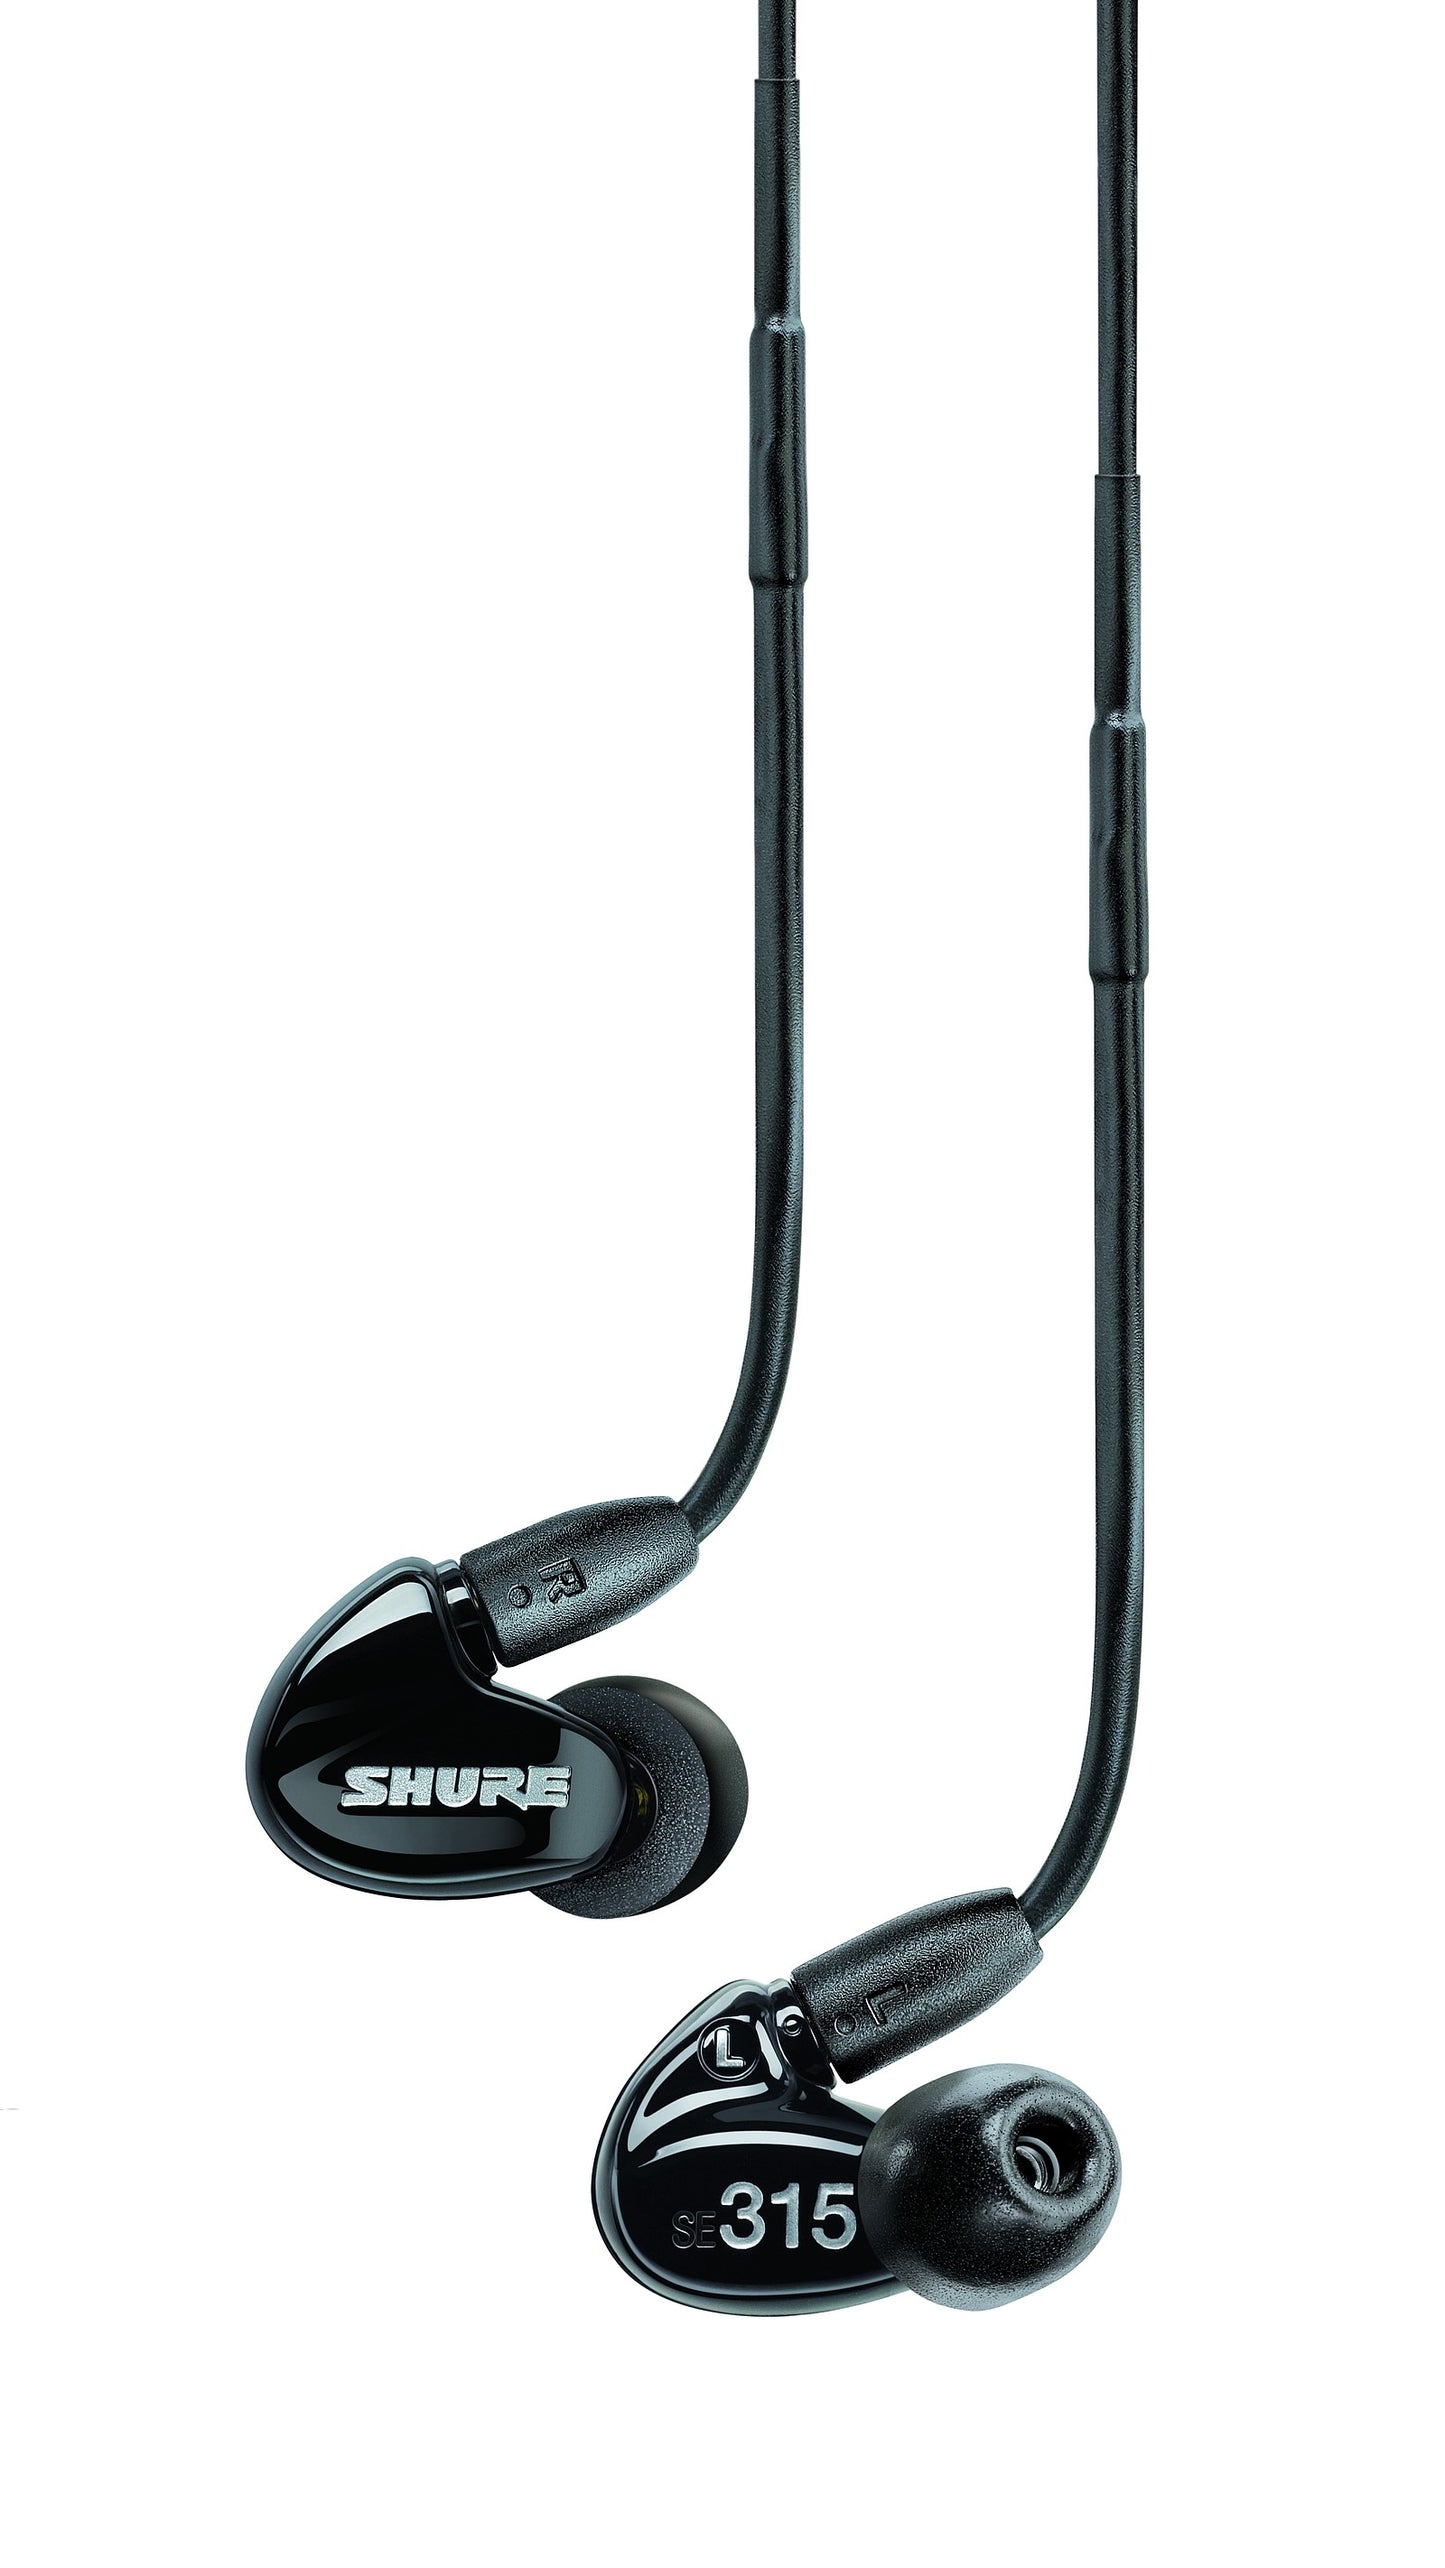 Shure SE315-K Sound Isolating Earphones with High-Definition MicroDriver + Tuned BassPort